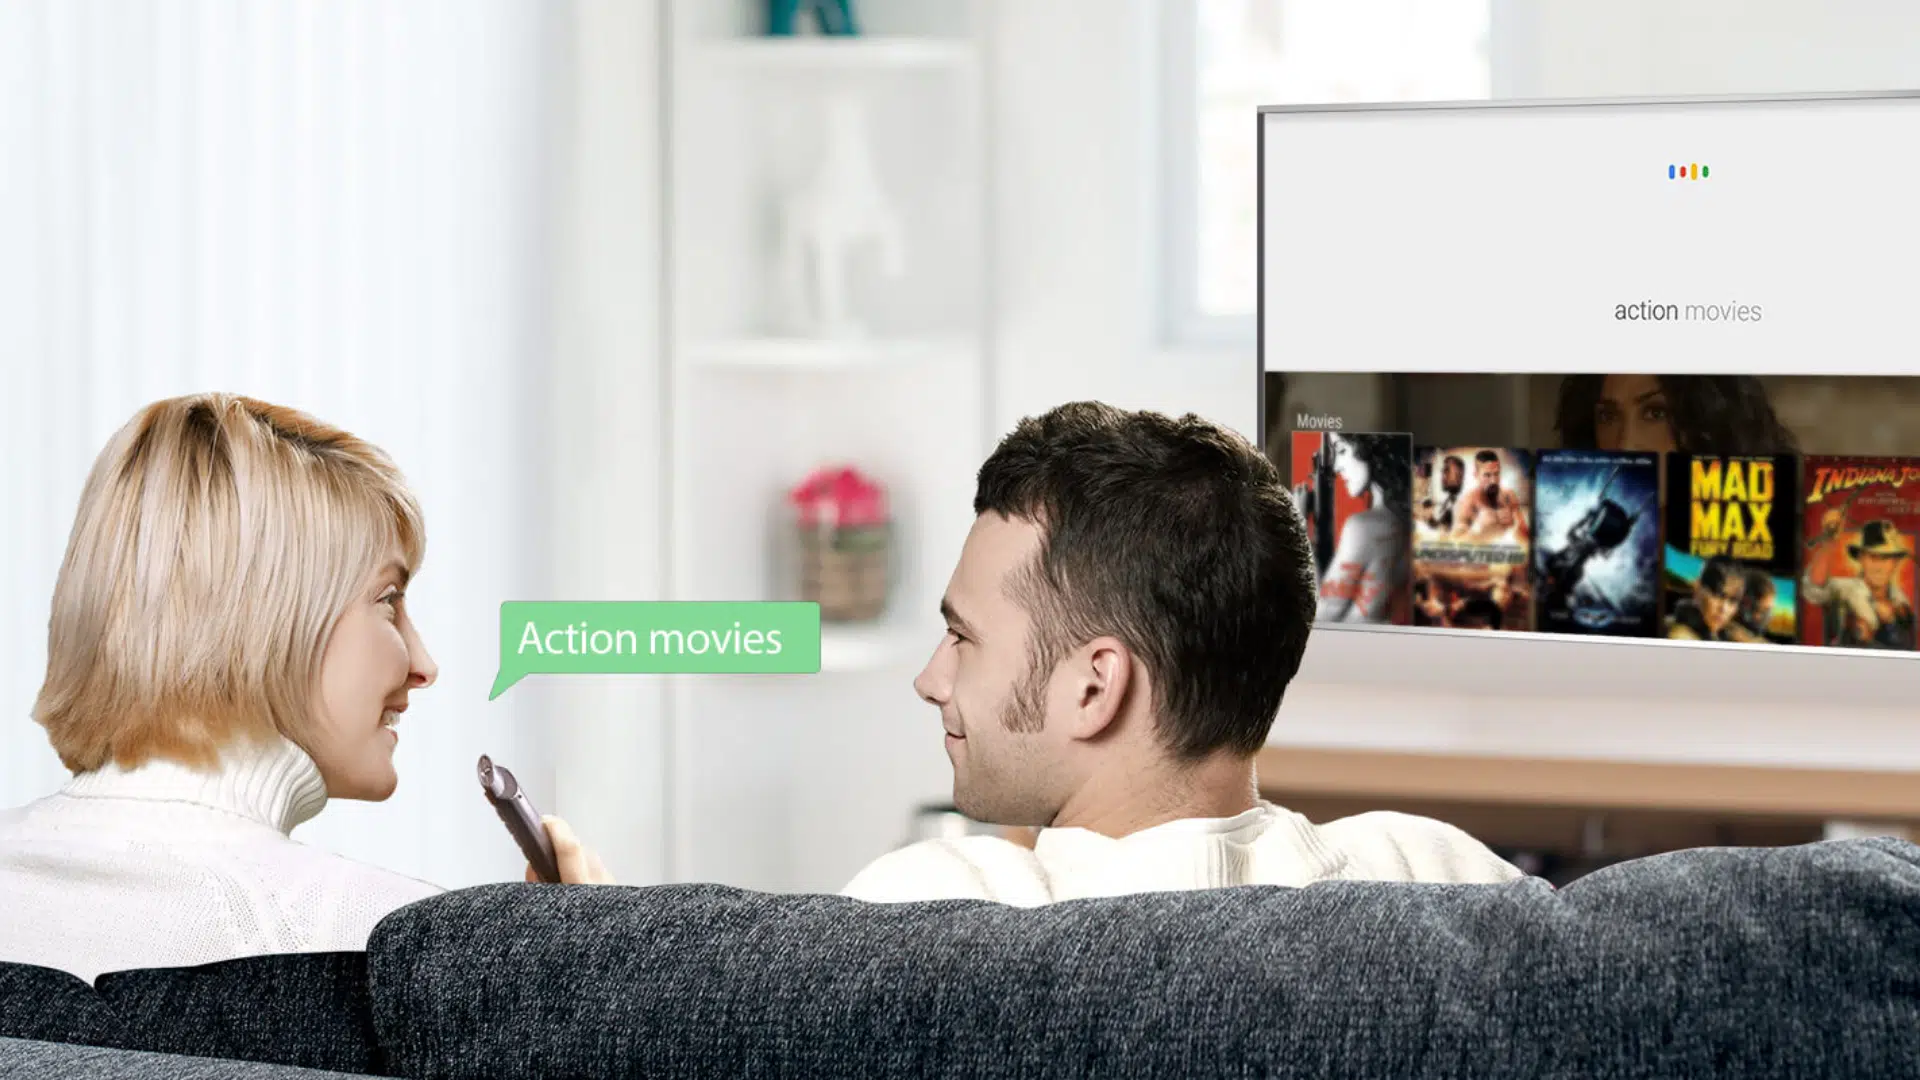 An image depicting the TCL S65A Series Smart Full HD AI LED Android TV with Google Assistant and Alexa voice control.